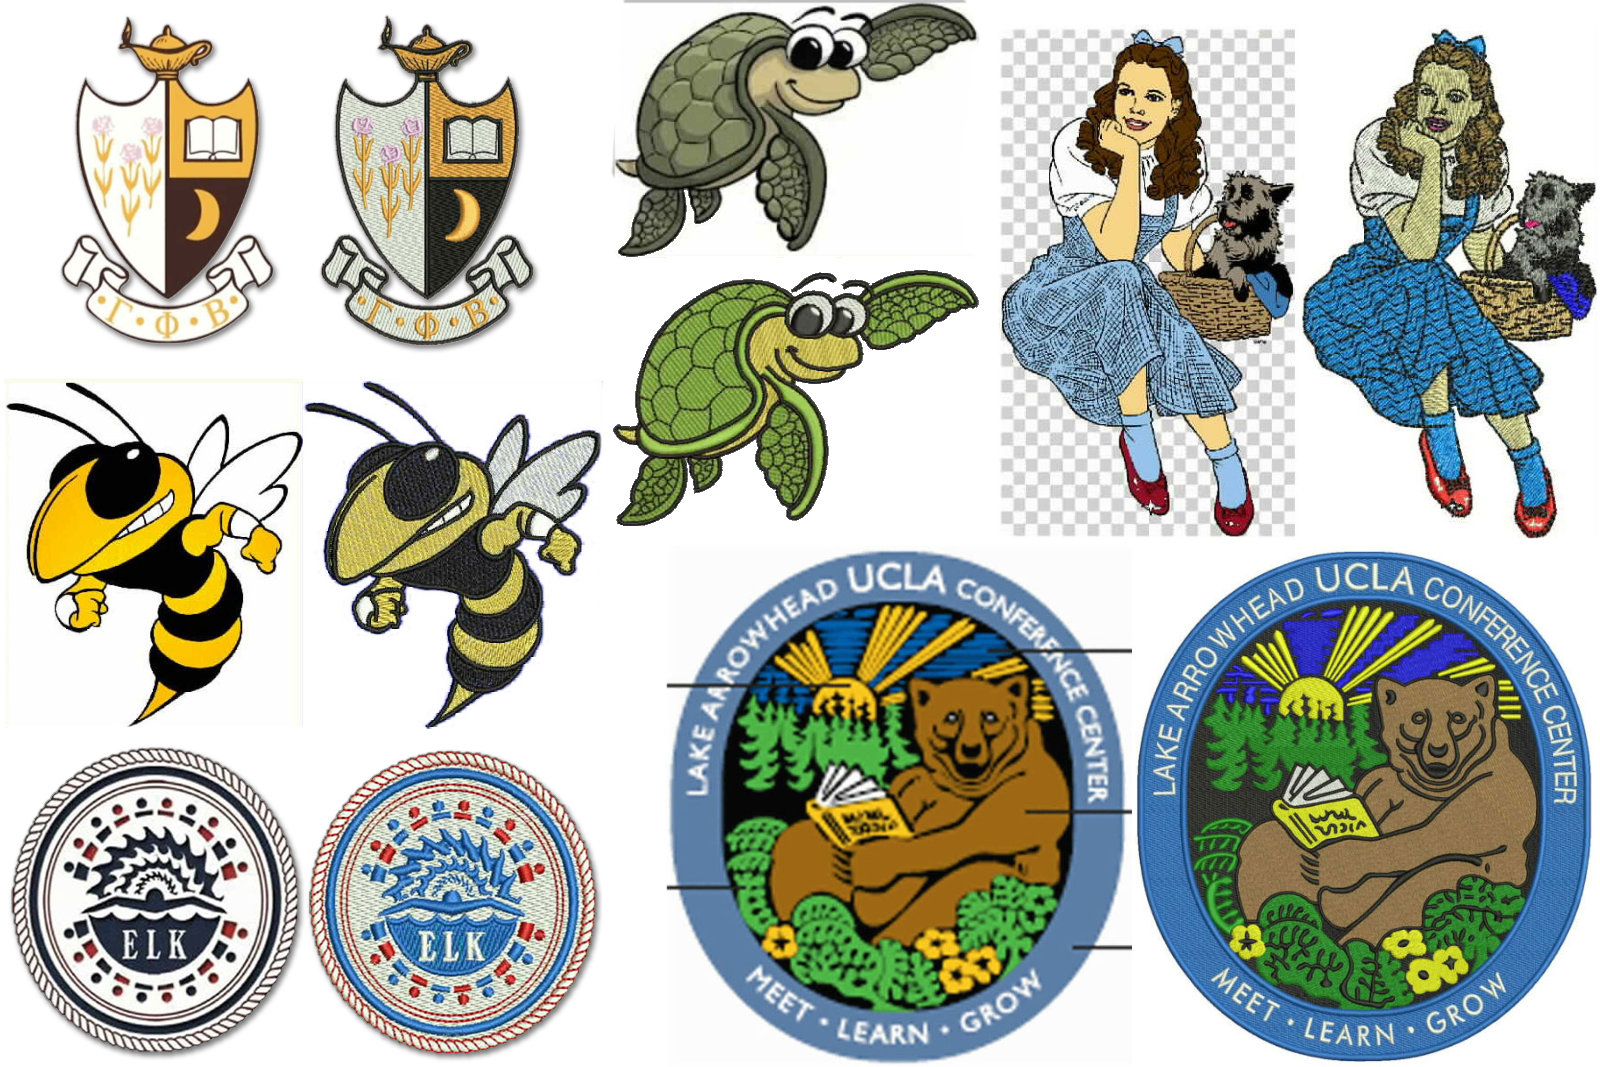 How to make custom embroidery patches - Patches Made Easy webinar replay 